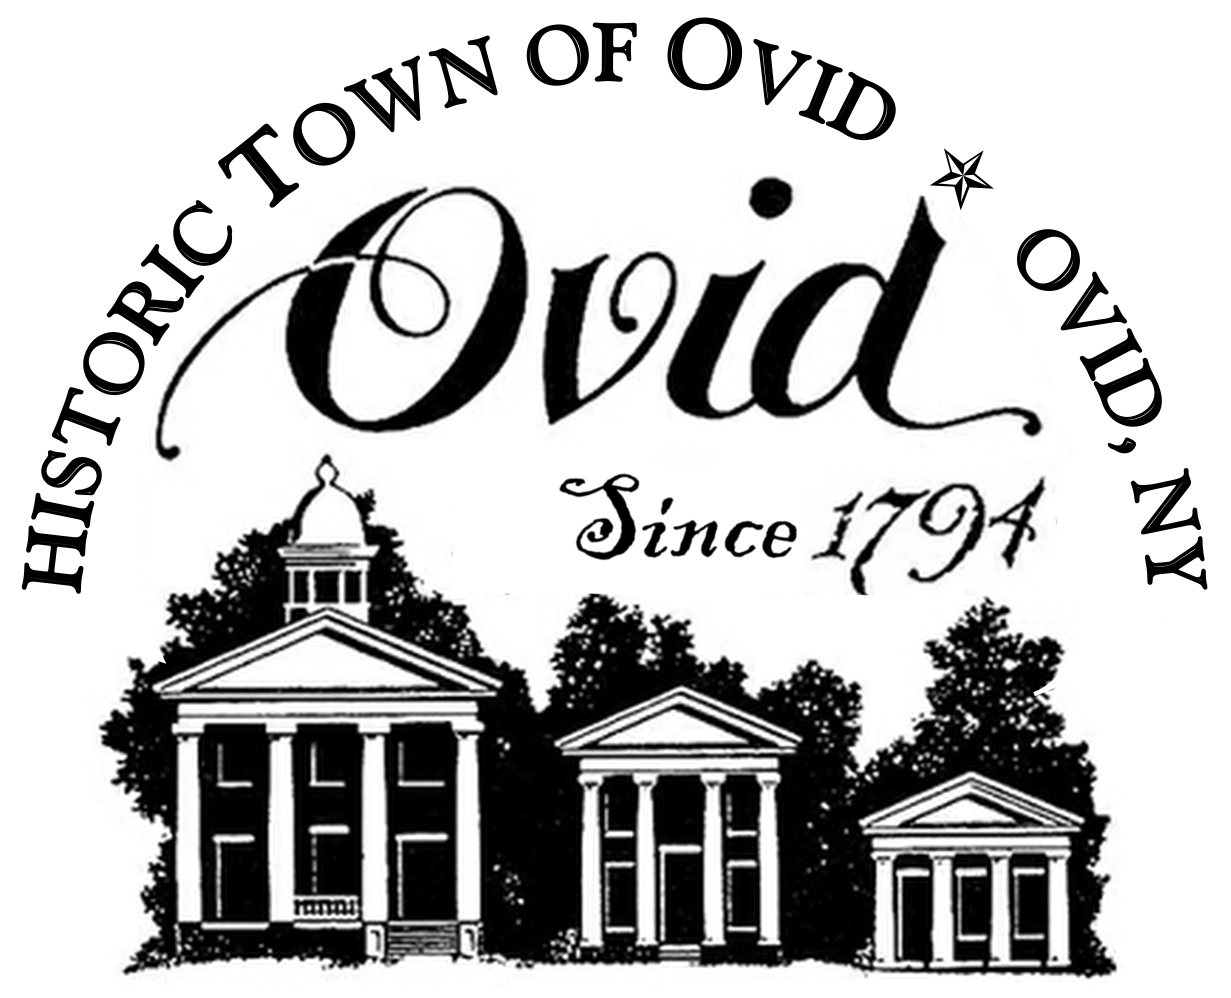 Town of Ovid